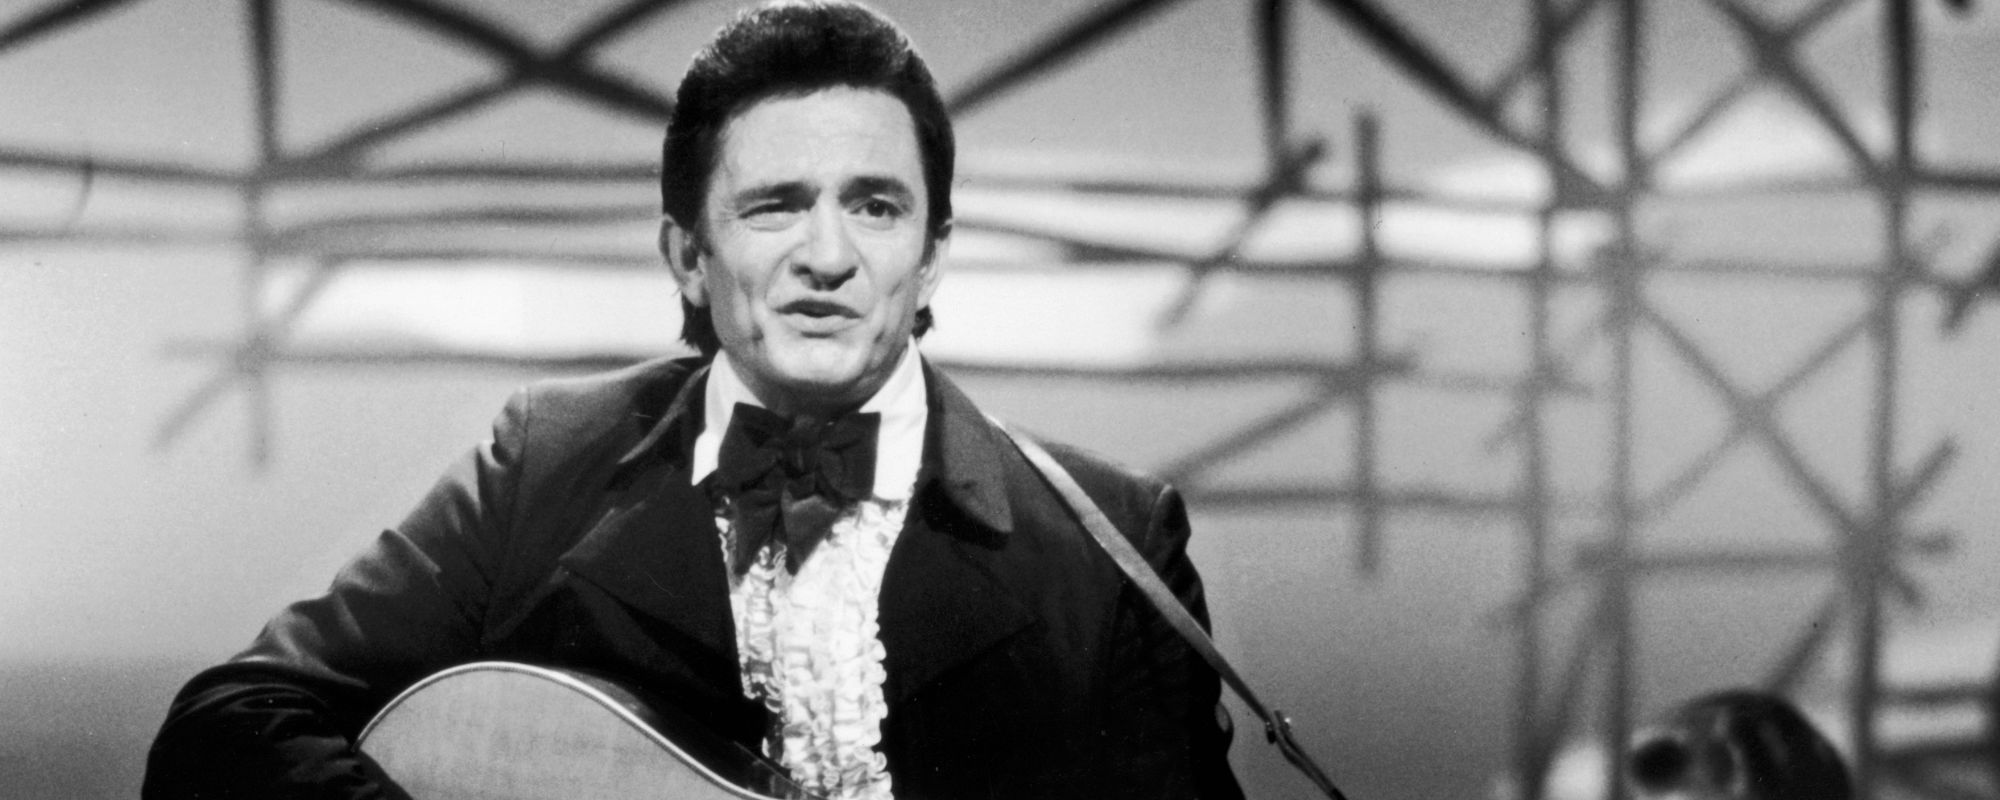 3 Memorable Moments From ‘The Johnny Cash Show’